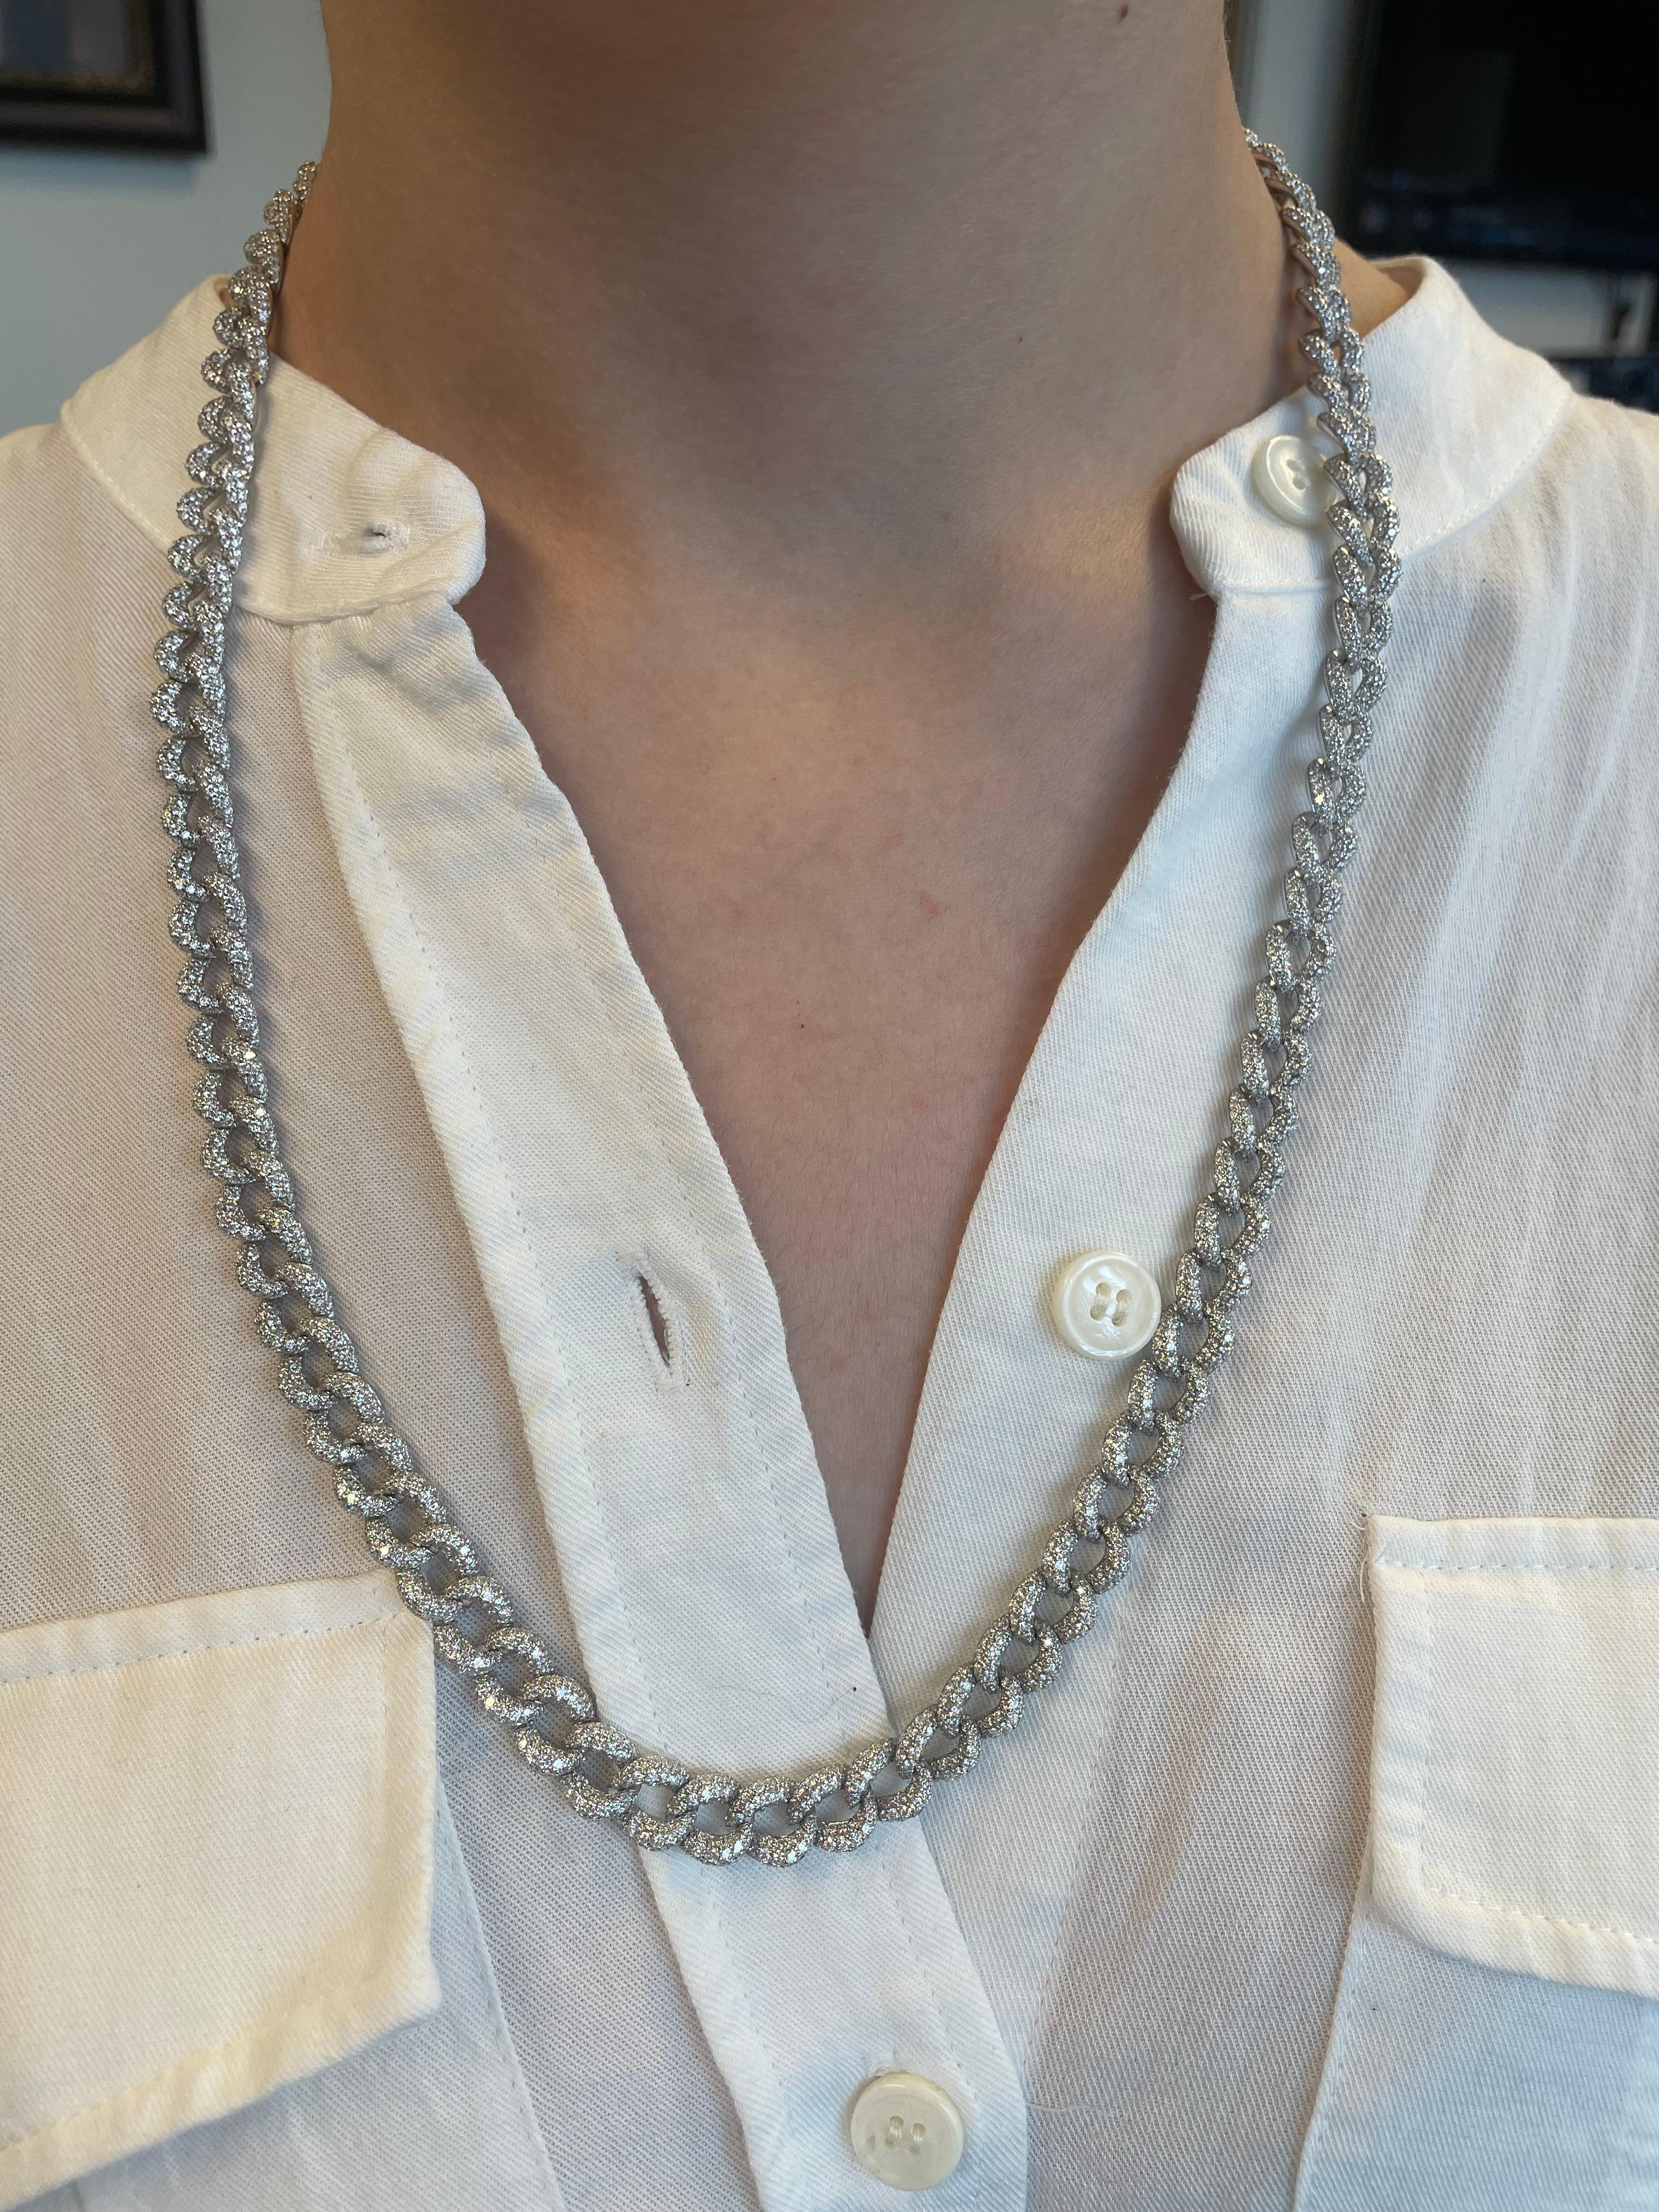 Modern diamond cuban link necklace. High jewelry by Alexander Beverly Hills.
3876 round brilliant diamonds, 28.57 carats total. Approximately G/H color and SI clarity. 18k white gold.
Accommodated with an up-to-date appraisal by a GIA G.G. once